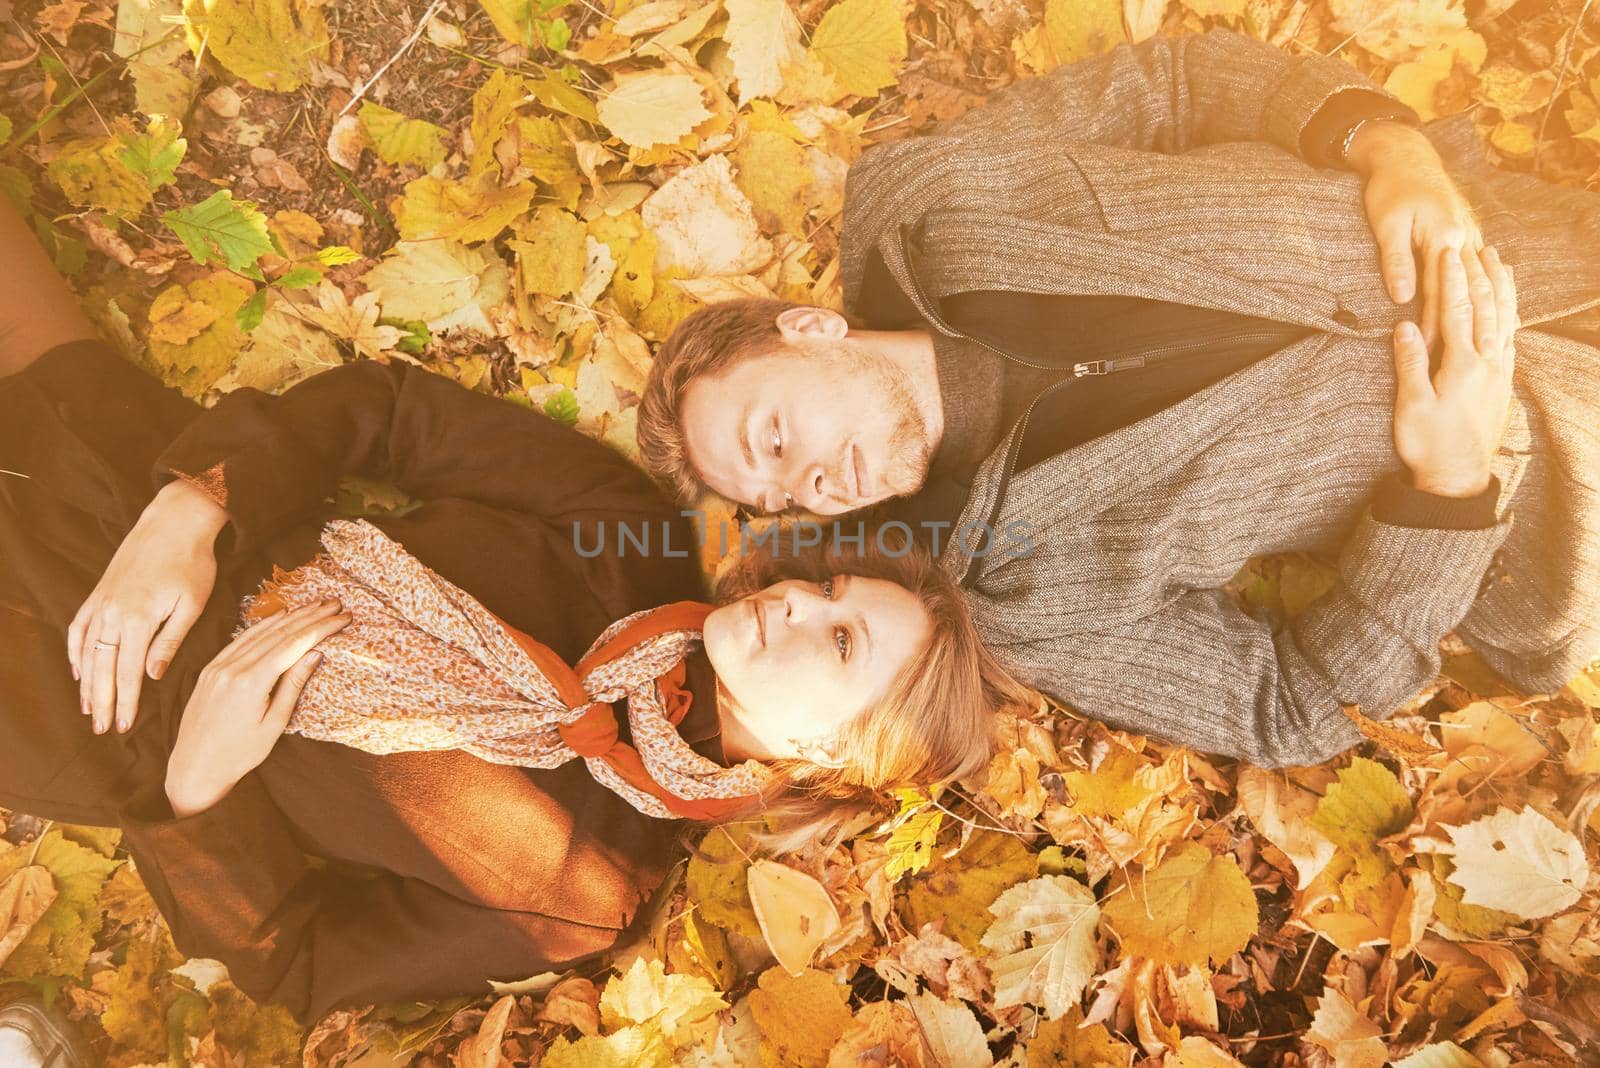 Loving couple lying on autumn leaves in the park. Image with sunlight effect.